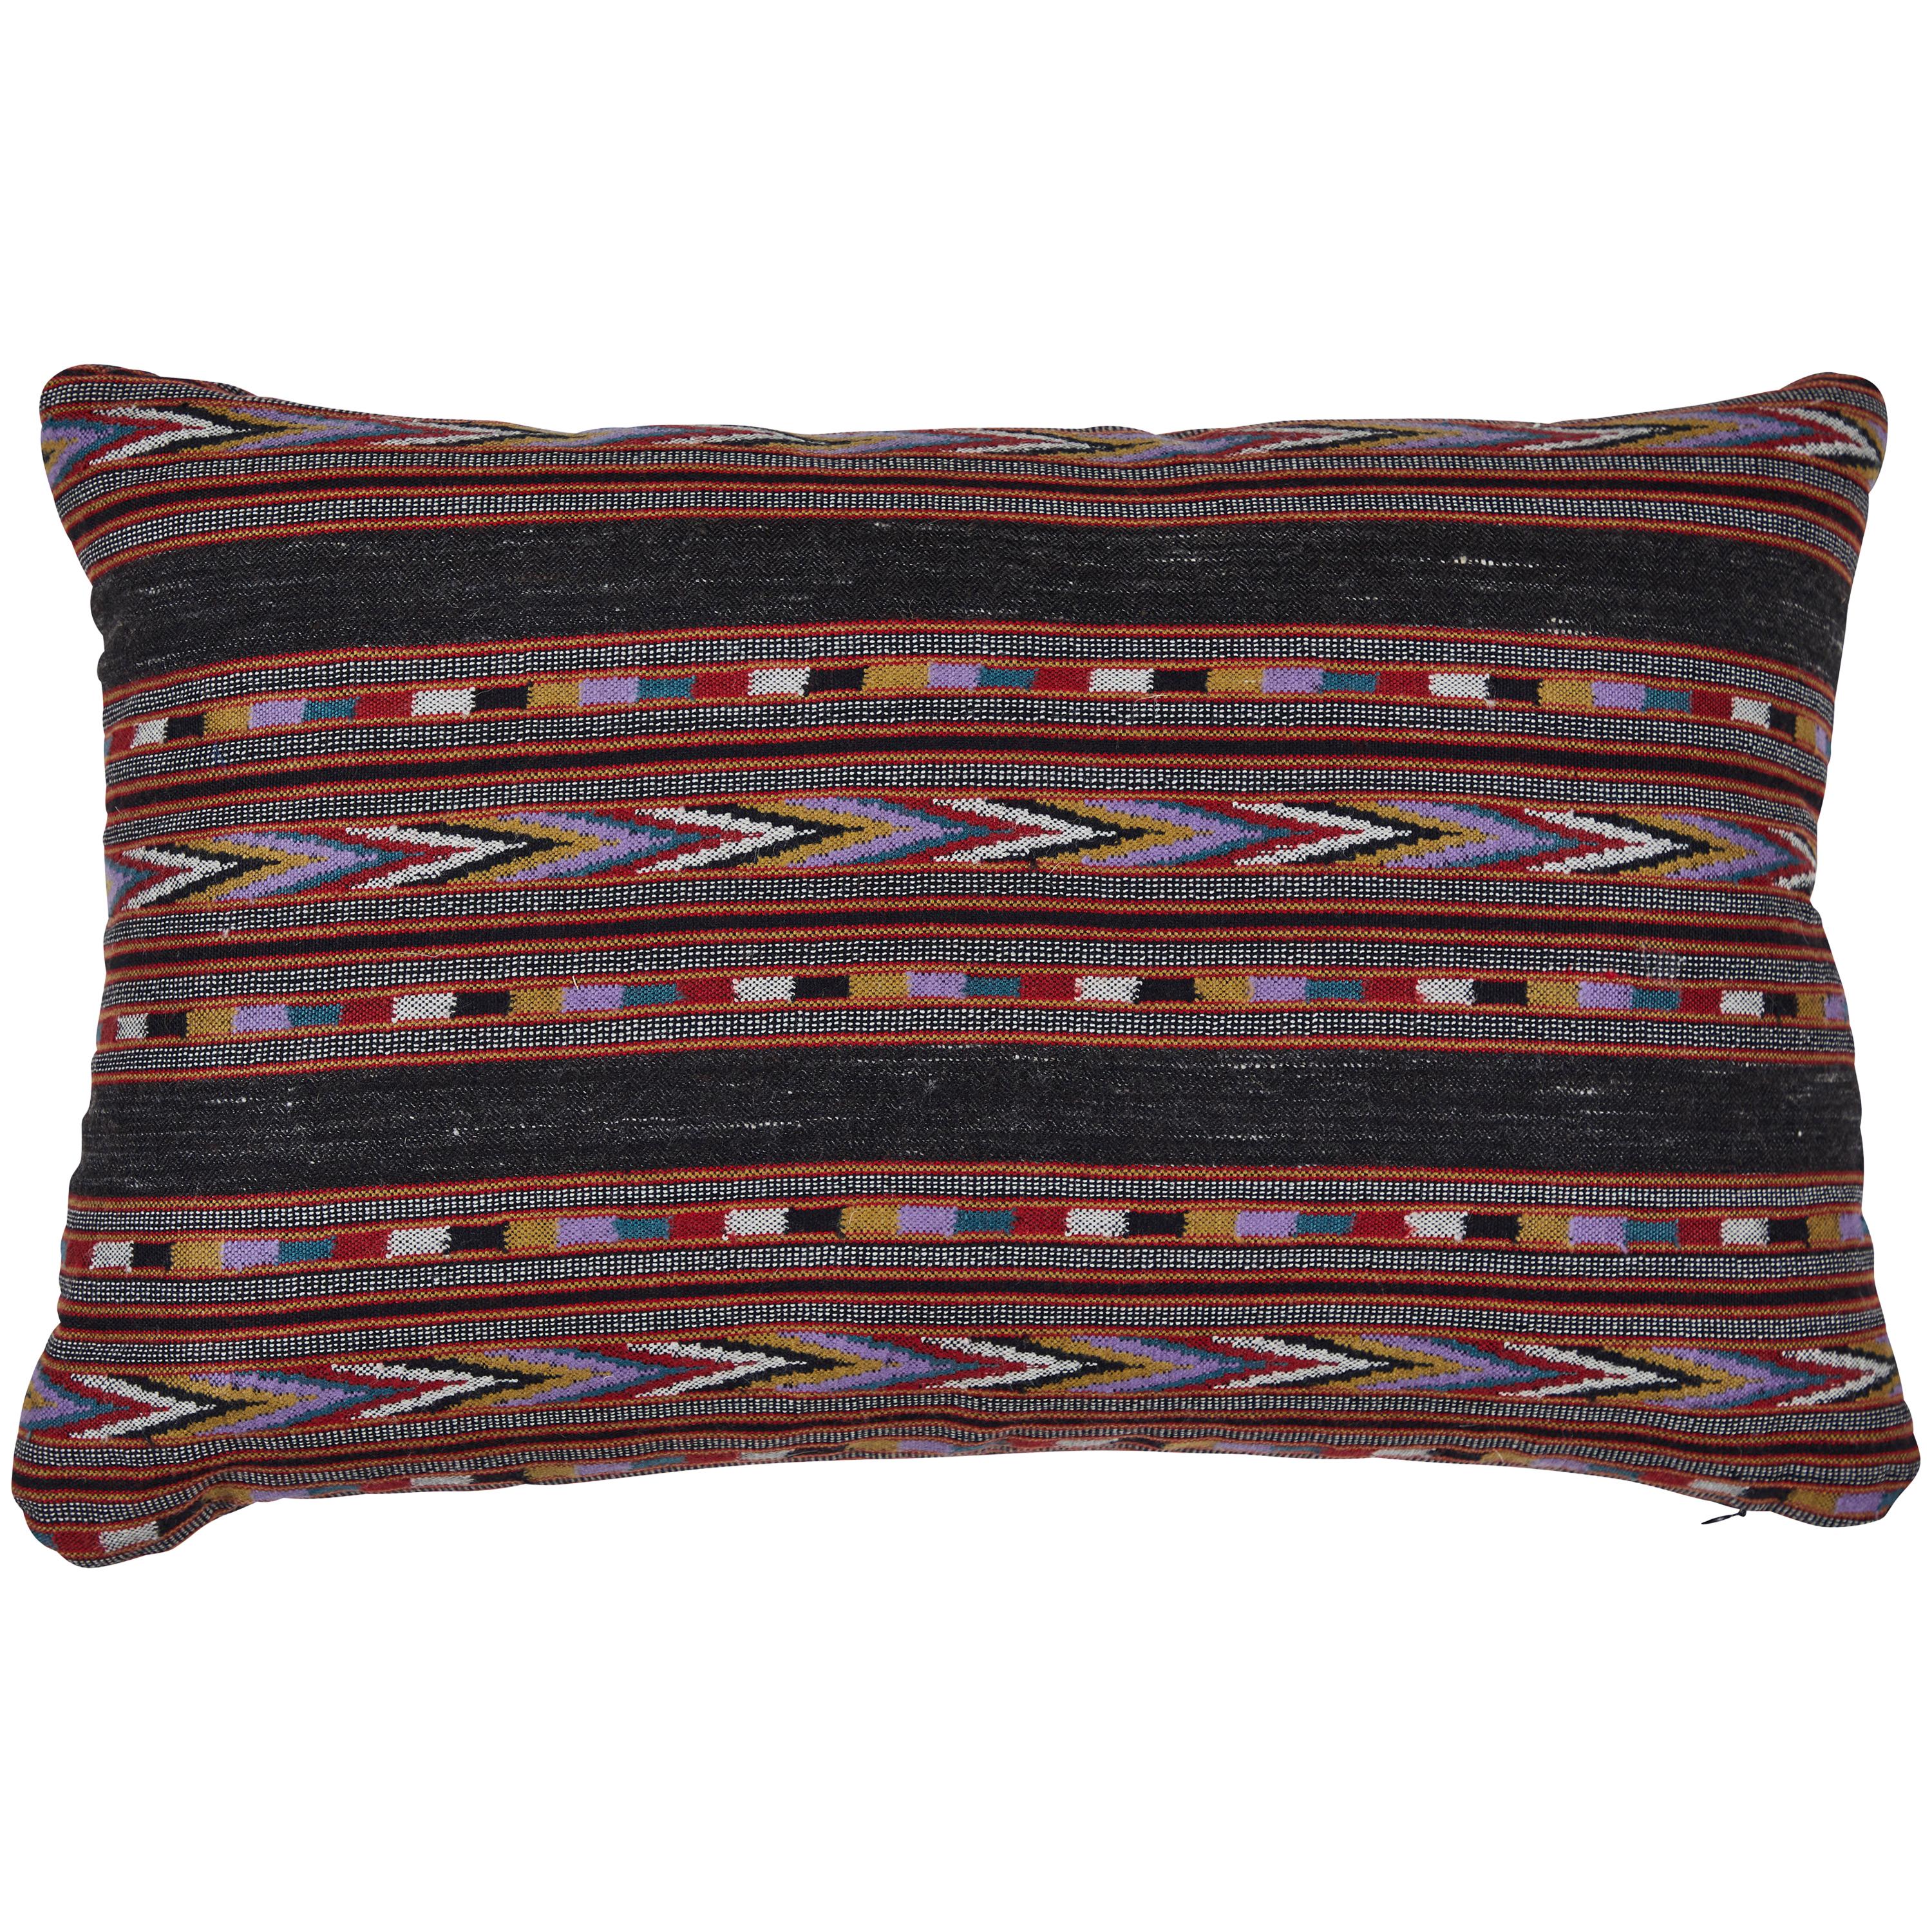 Indian Handwoven Yak Wool Pillow For Sale